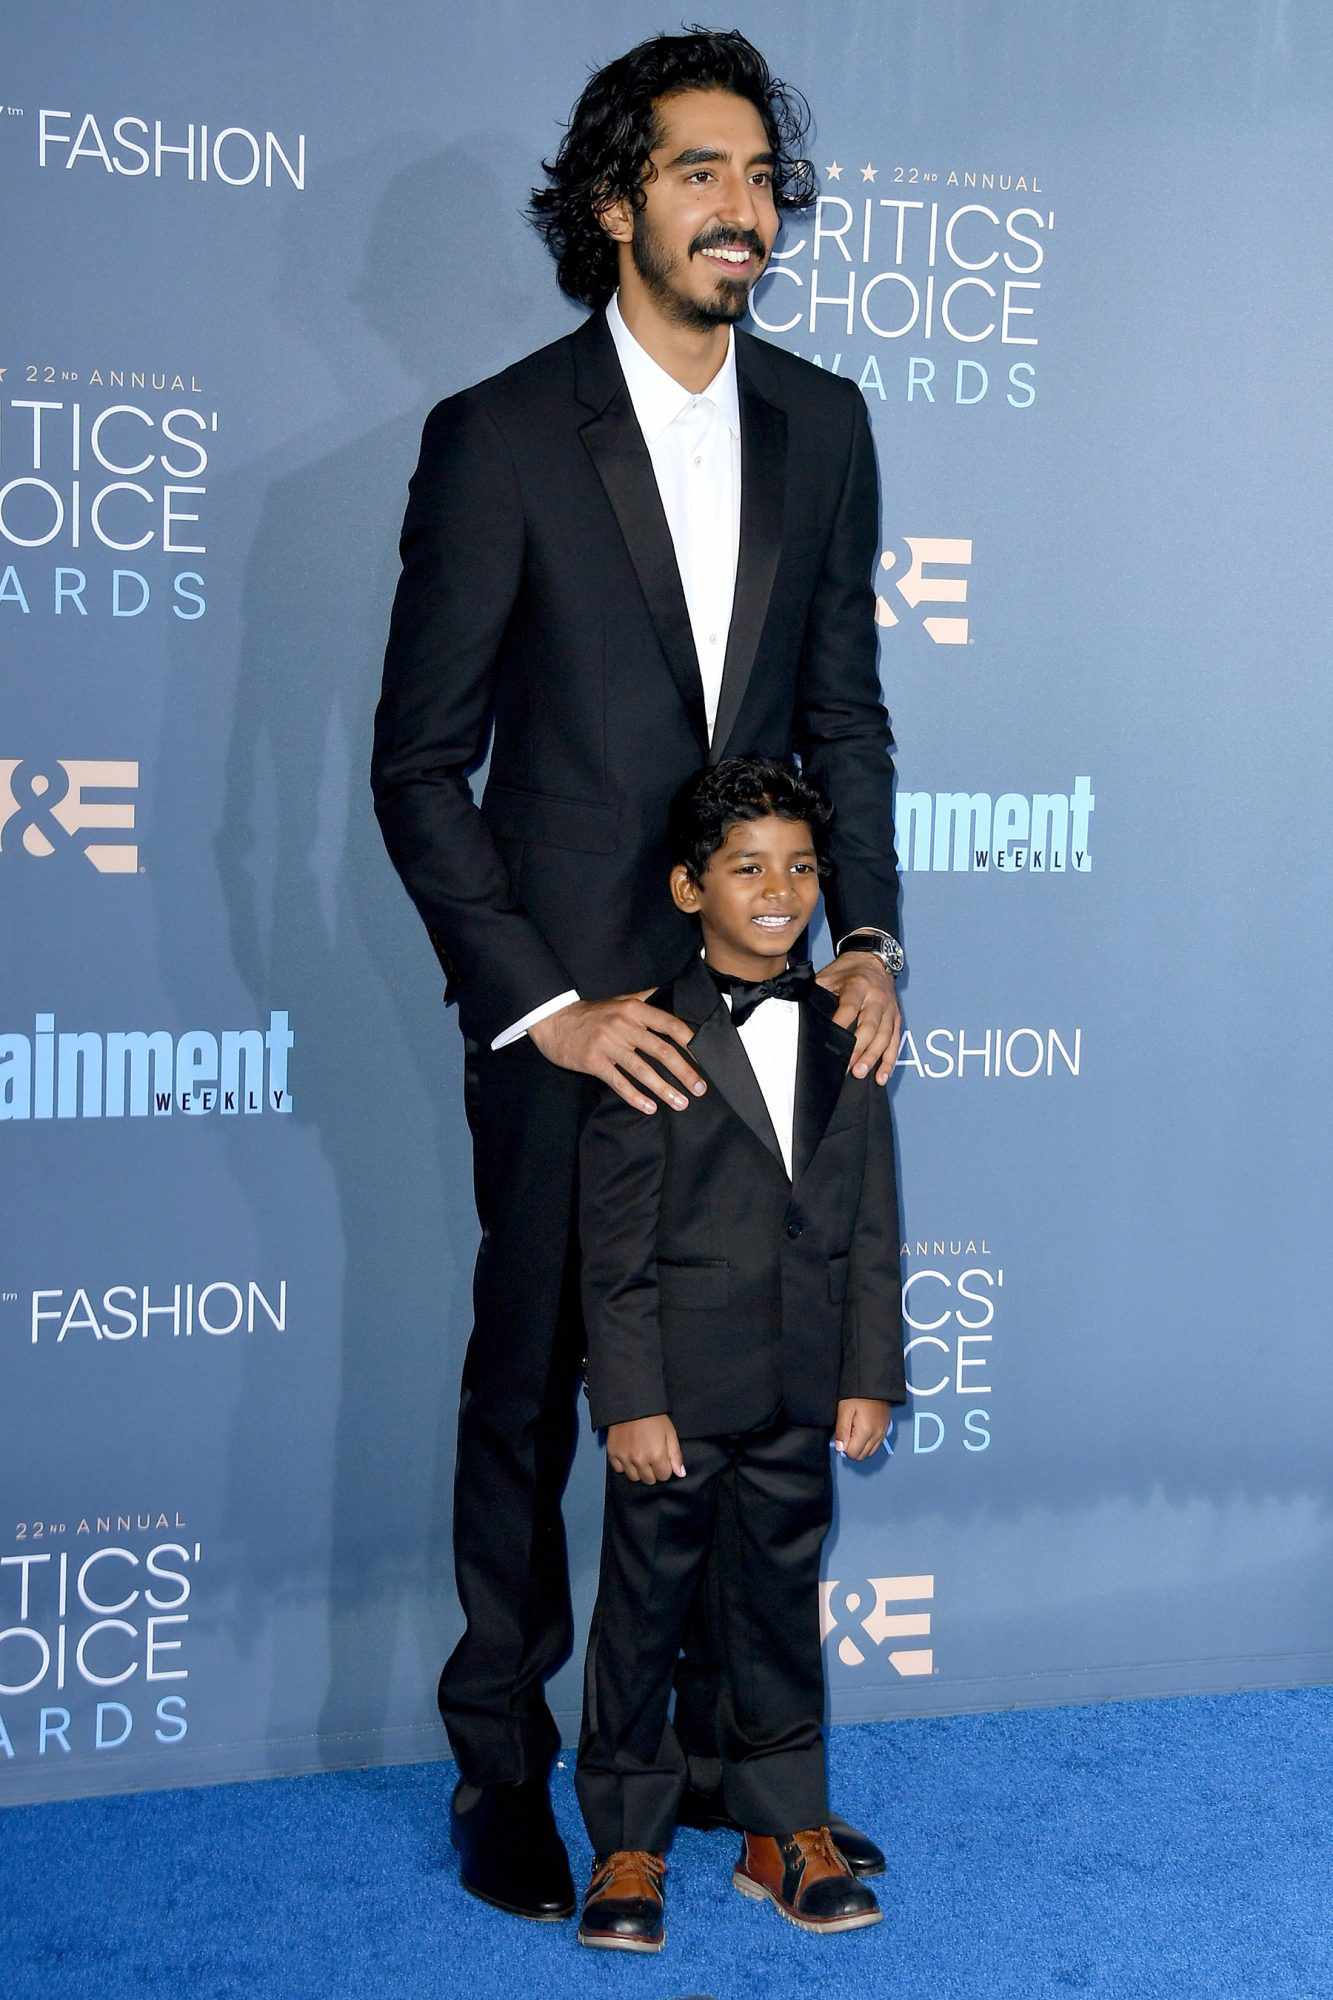 Dev Patel and Sunny Pawar at the 22nd Annual Critics' Choice Awards in Santa Monica on December 11, 2016